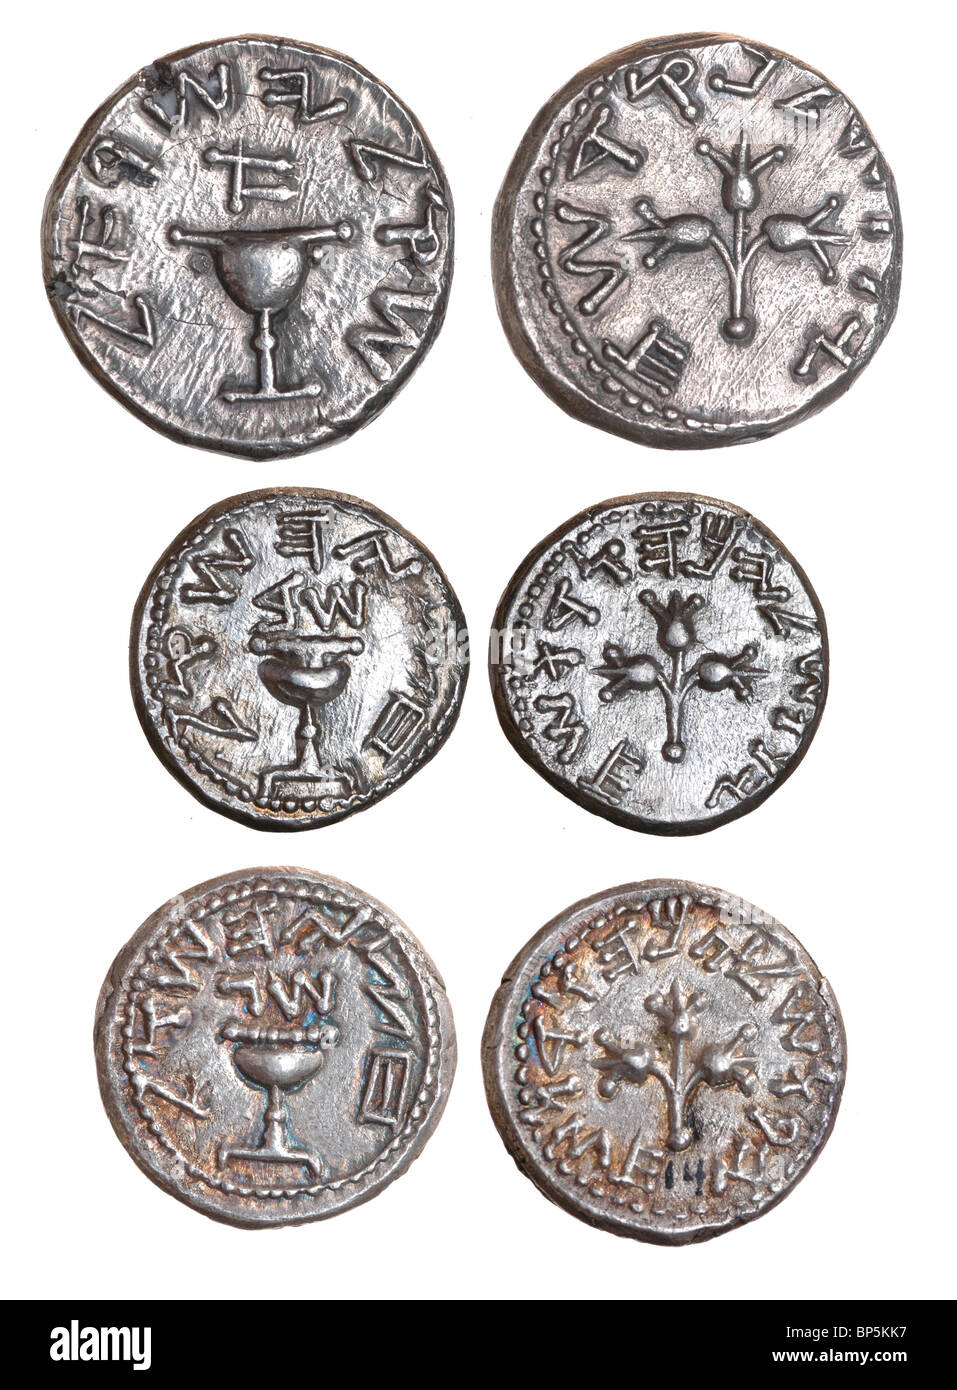 JEWISH WAR SHEKELS C. 66 - 70 AD. TOP: 1 SILVER SHEKEL COIN INSCRIBED: FIRST. YEAR OF THE REVOLT. MIDLE: 01-Feb SILVER SHEKEL Stock Photo